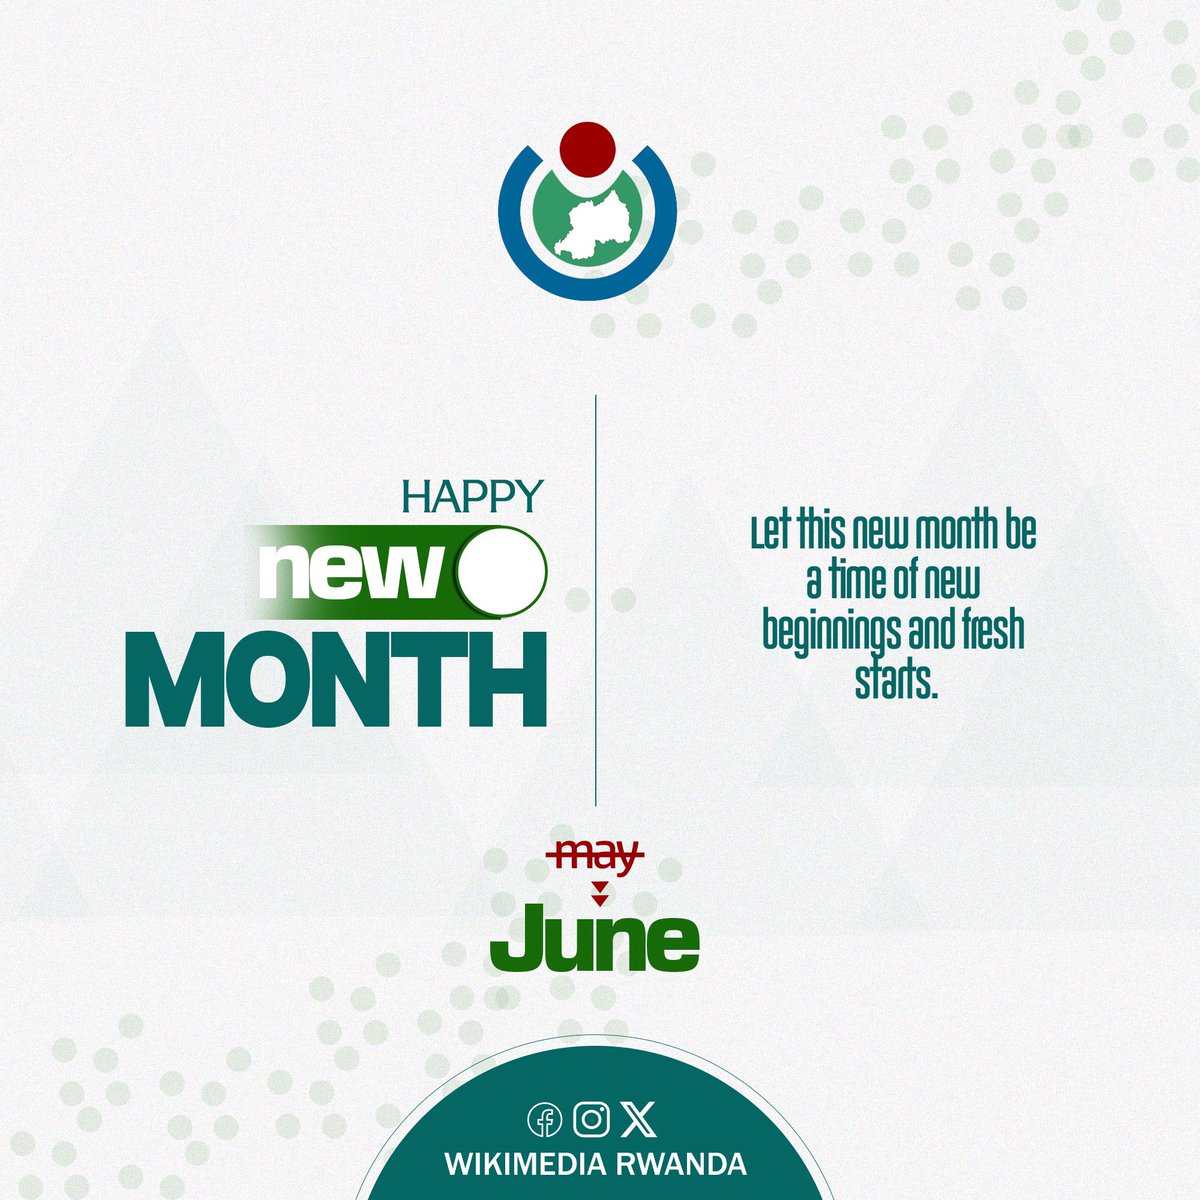 Happy June, everyone! Wishing you a month filled with new opportunities, joy, and success. Let's make the most of it! #HappyJune #NewMonth #FreshStart